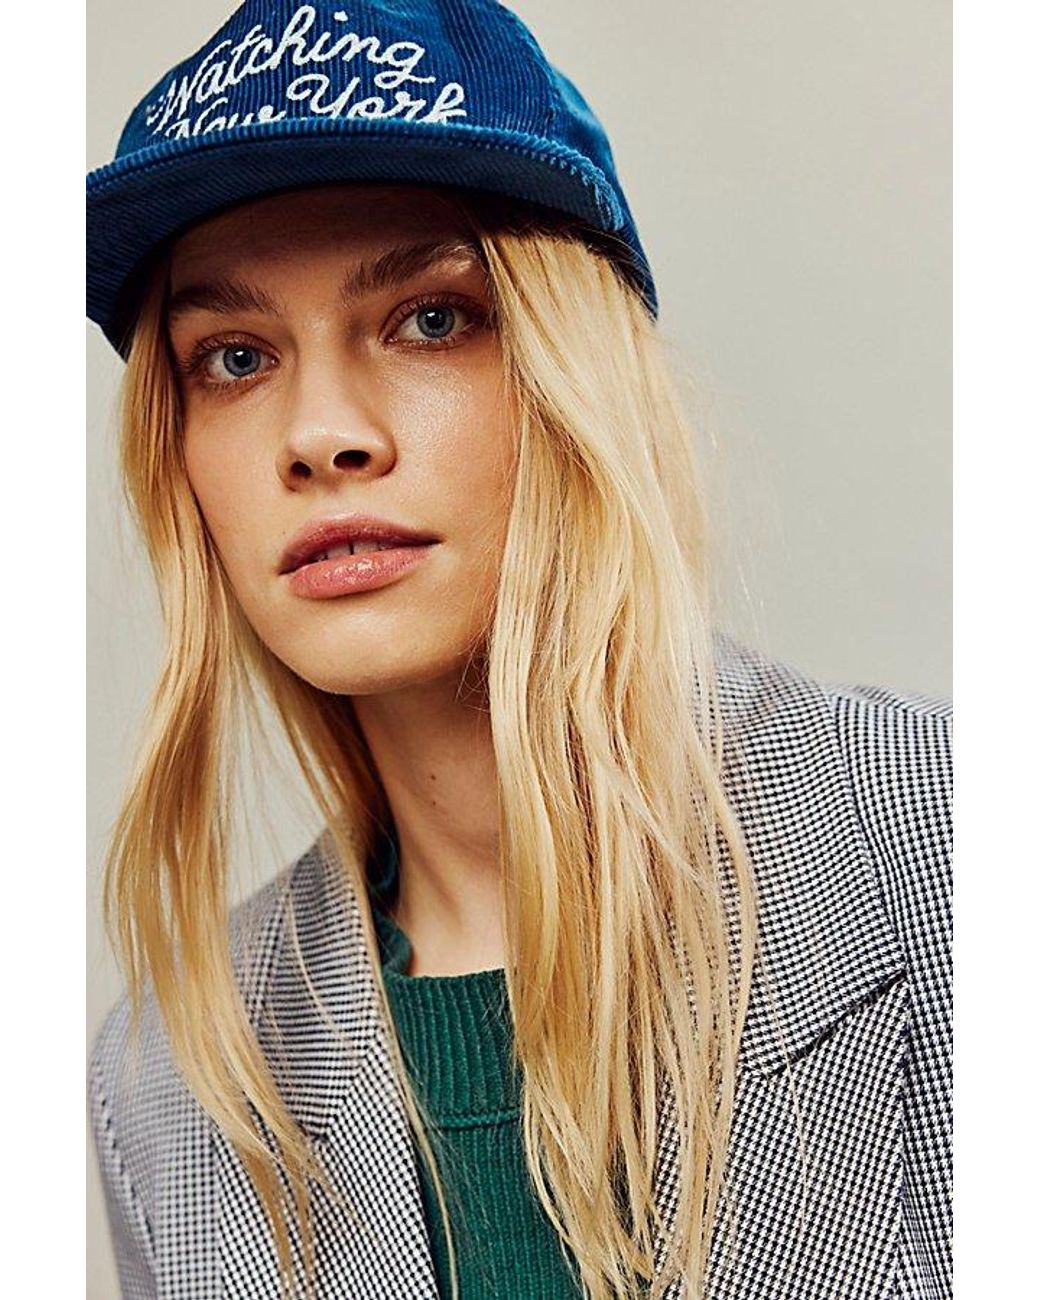 Free People Watching New York Commuter Hat in Blue | Lyst